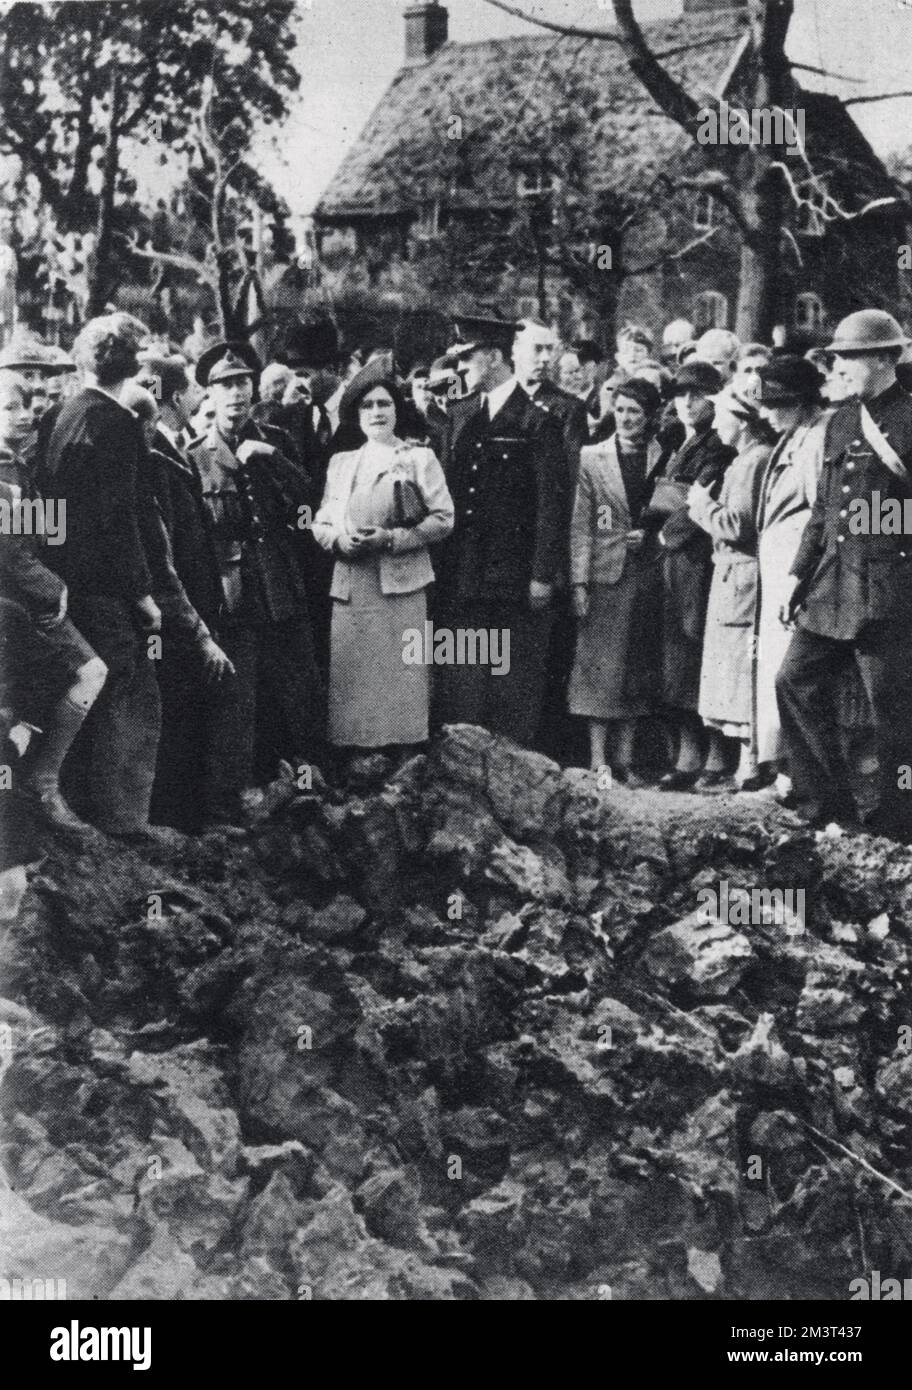 King George VI and Queen Elizabeth watching an air battle while visiting bombed areas in London. They are standing on the edge of a large crater. Stock Photo